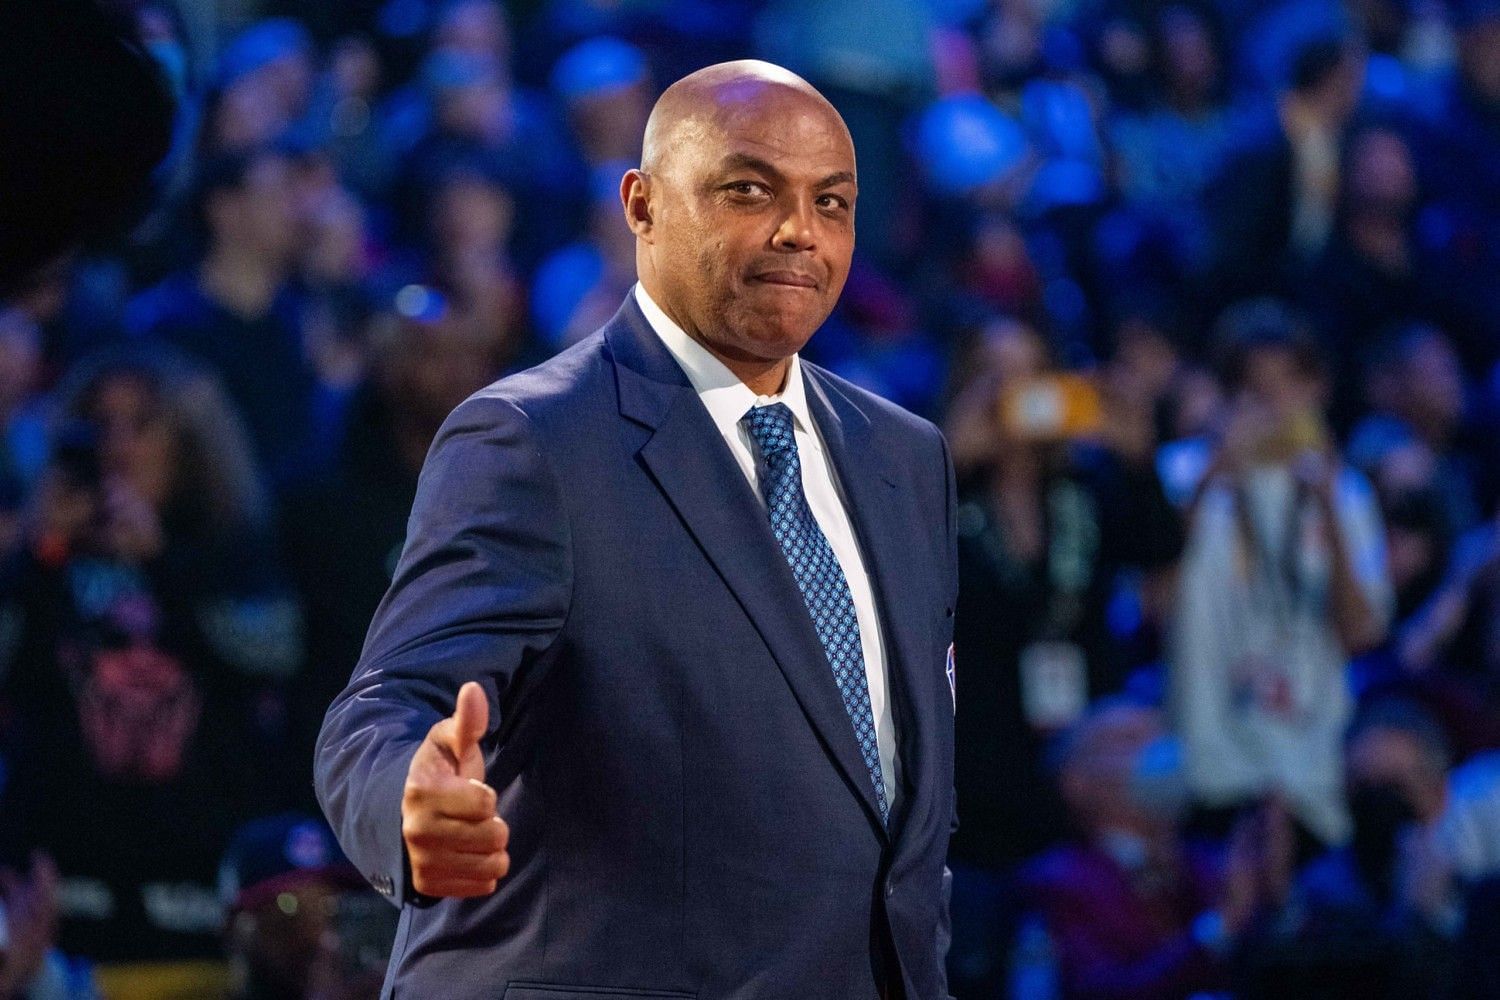 NBA legend and Inside The NBA analyst Charles Barkley